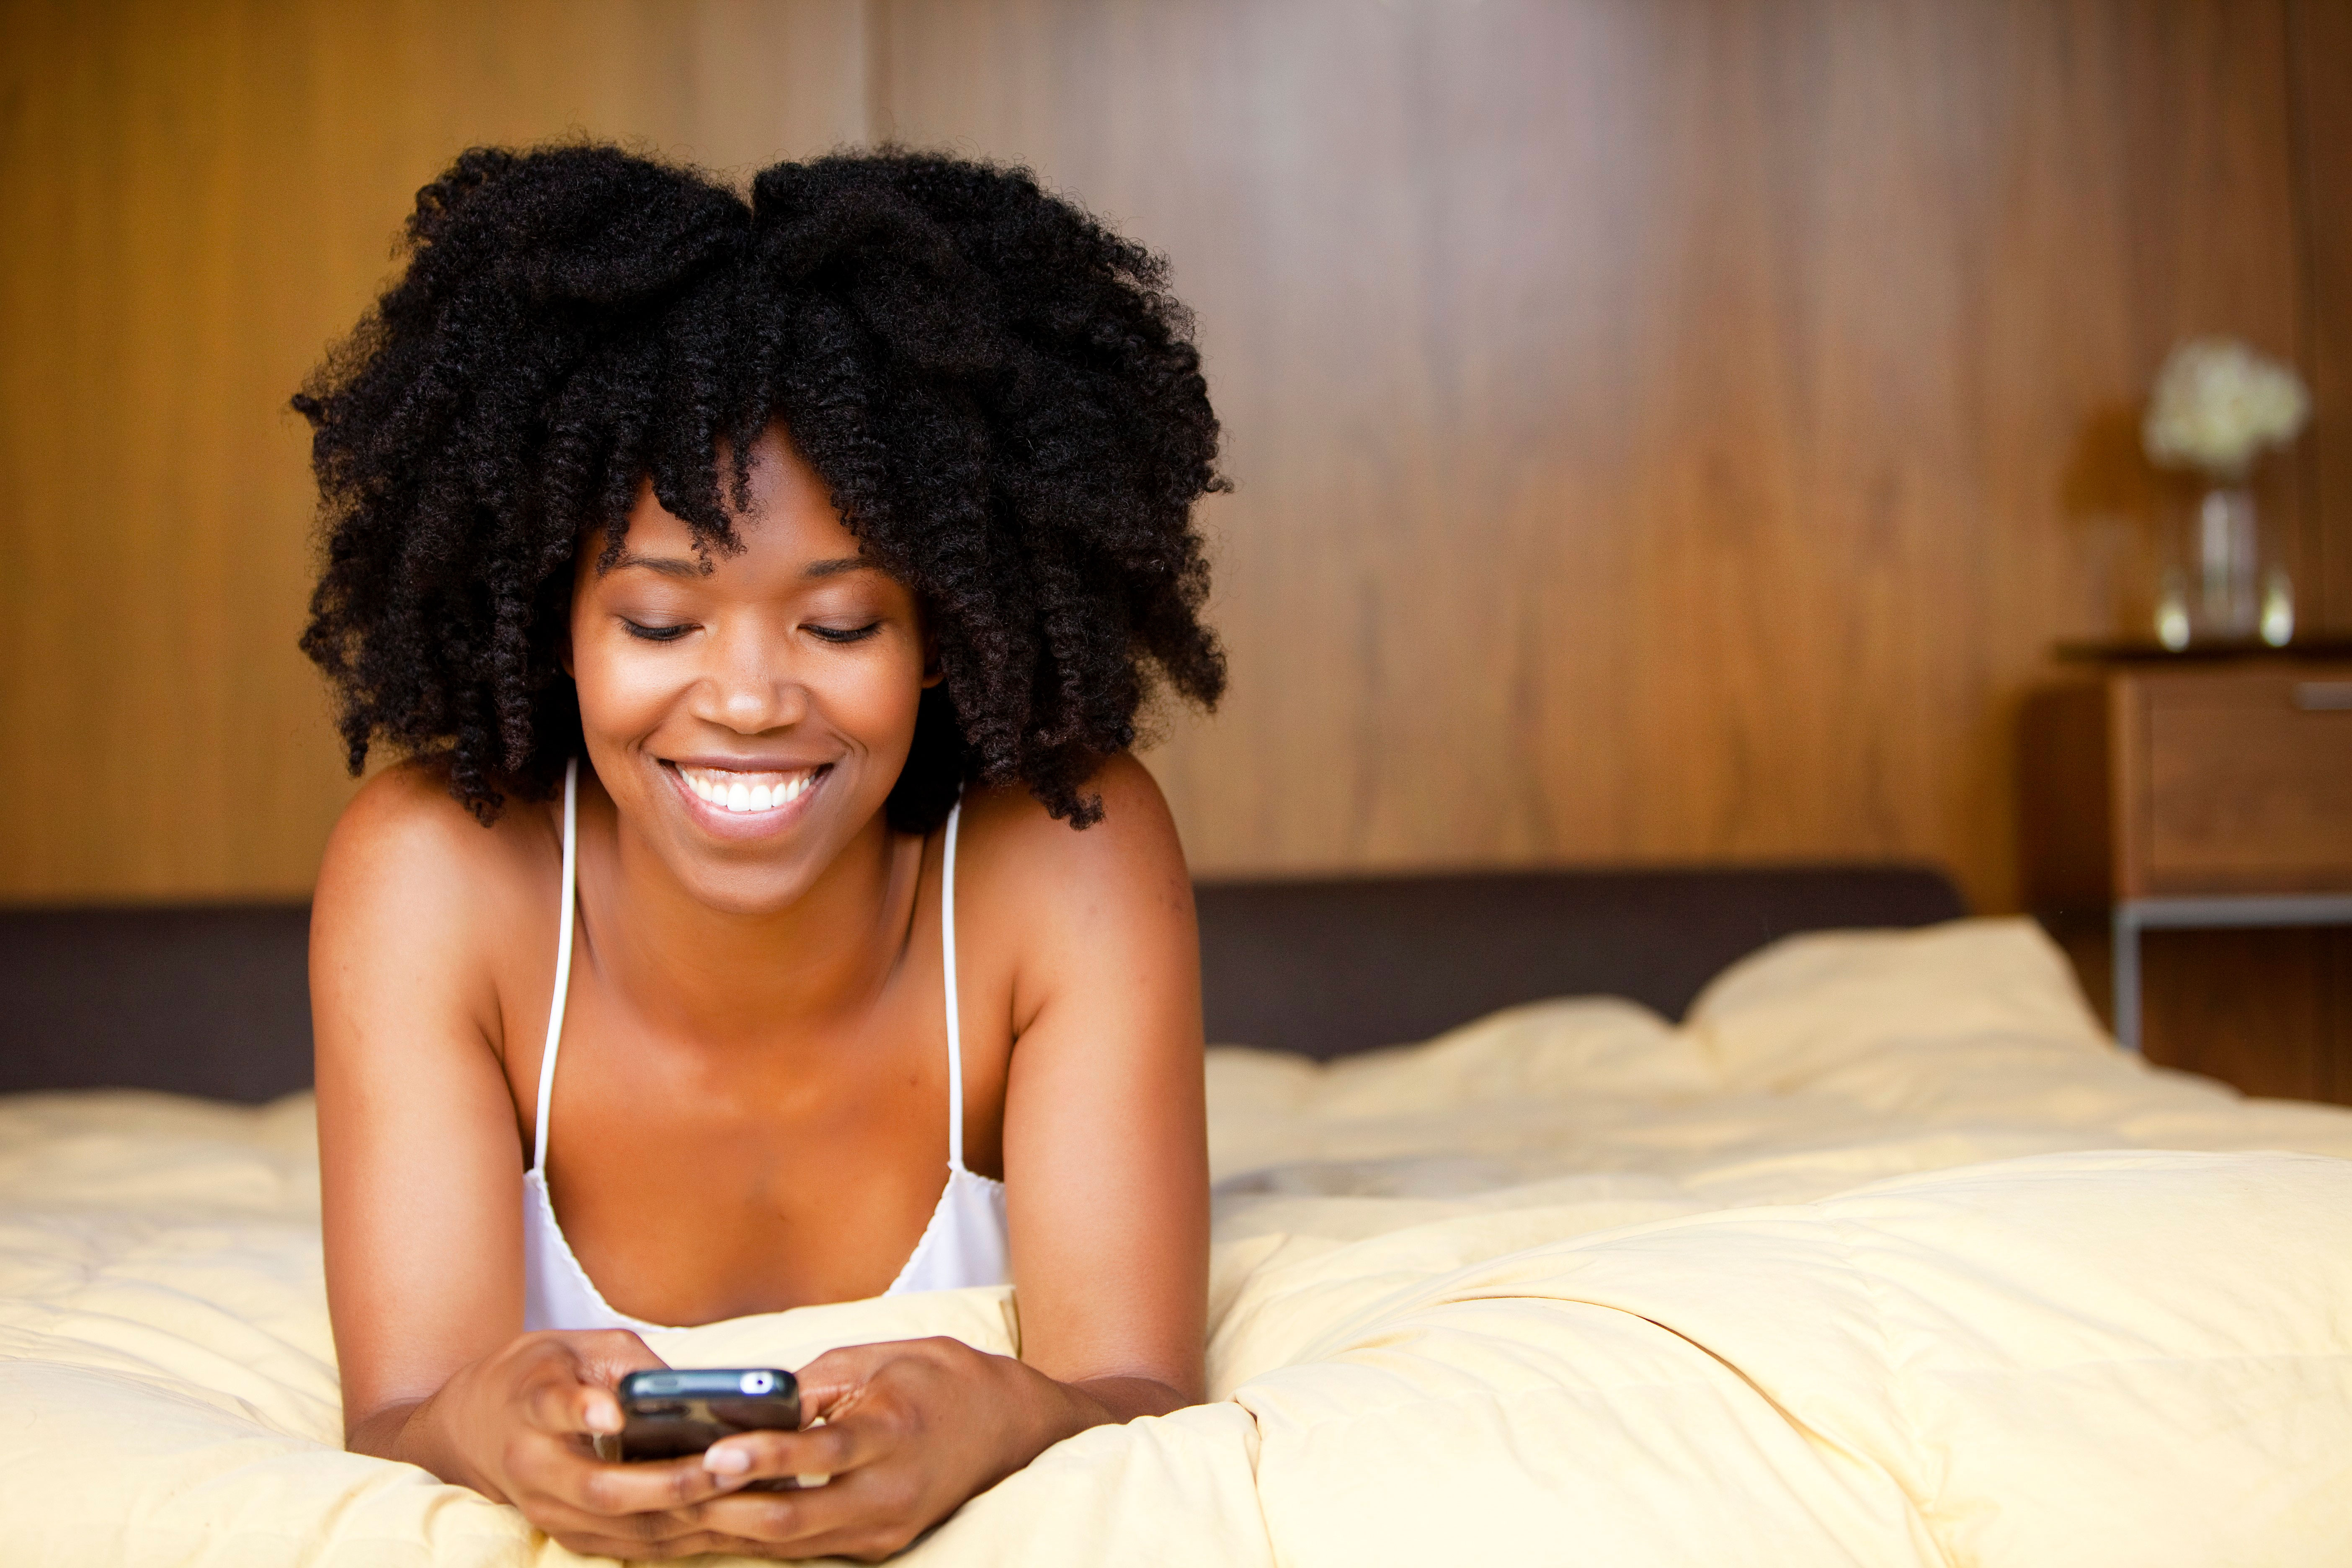 A black woman lying in bed using a cell phone. --- Image by © Michael Poehlman/Corbis